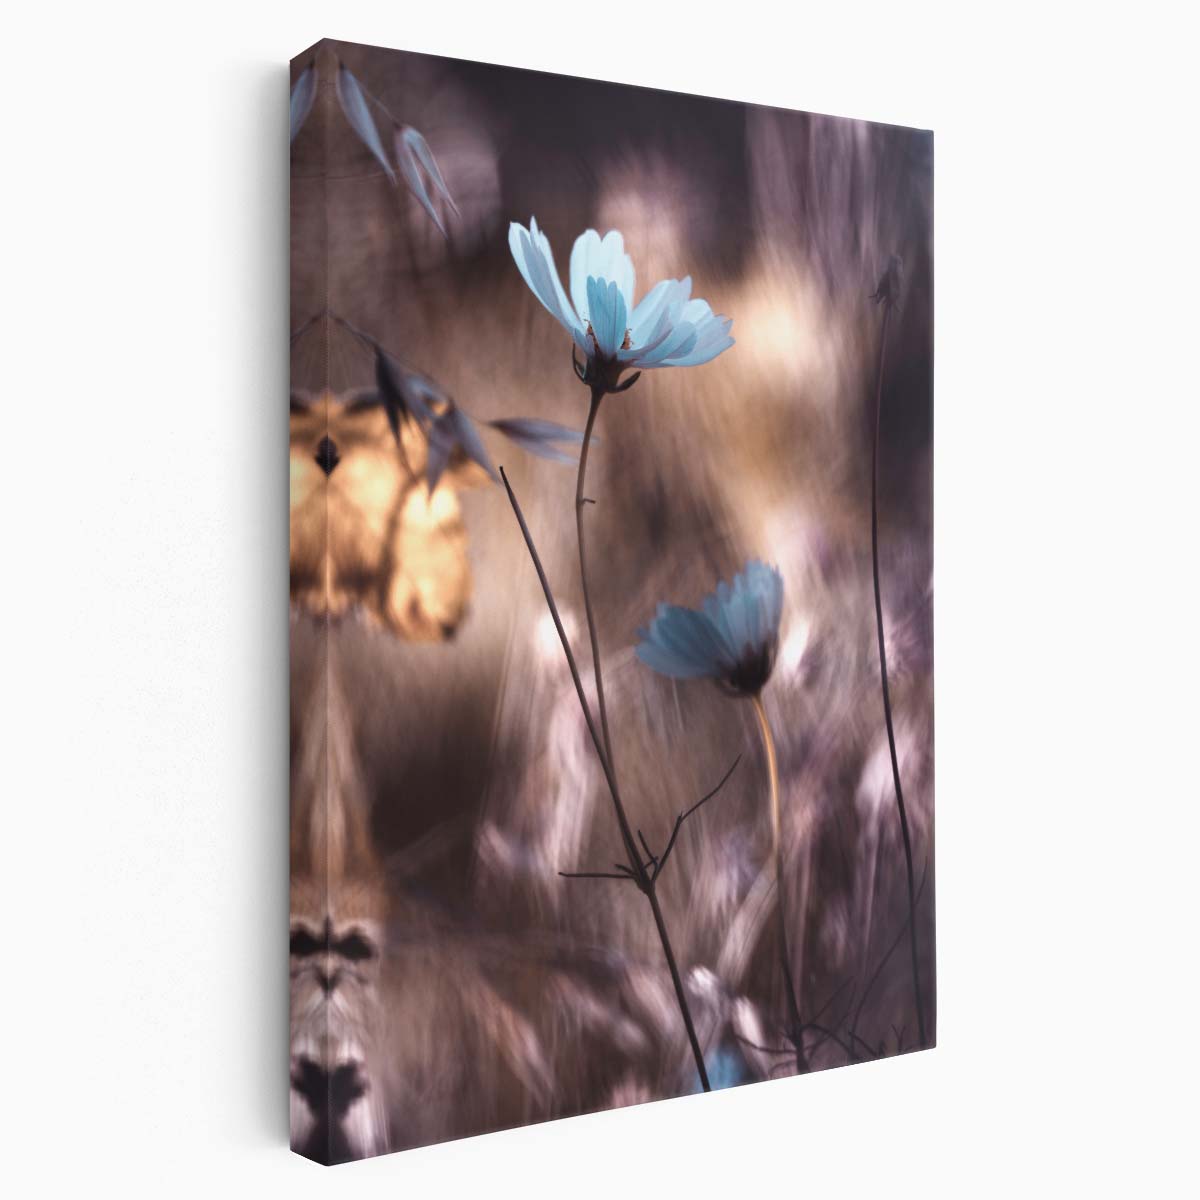 Delicate Blue Autumn Flower Macro Photography Wall Art by Luxuriance Designs, made in USA